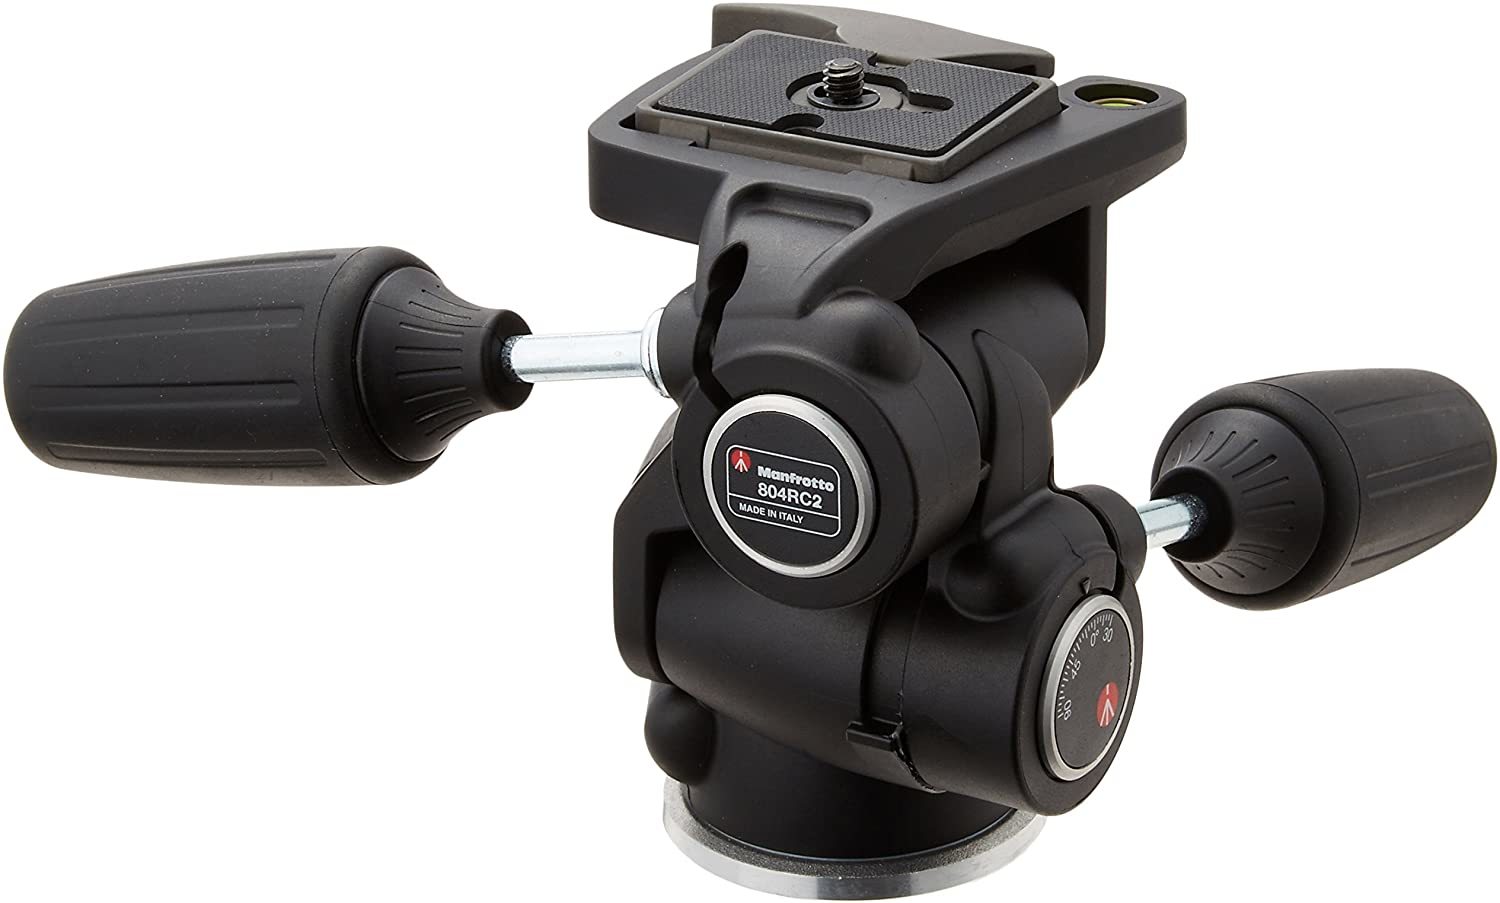 manfrotto-804rc2-light-weight-photo-tripod-head